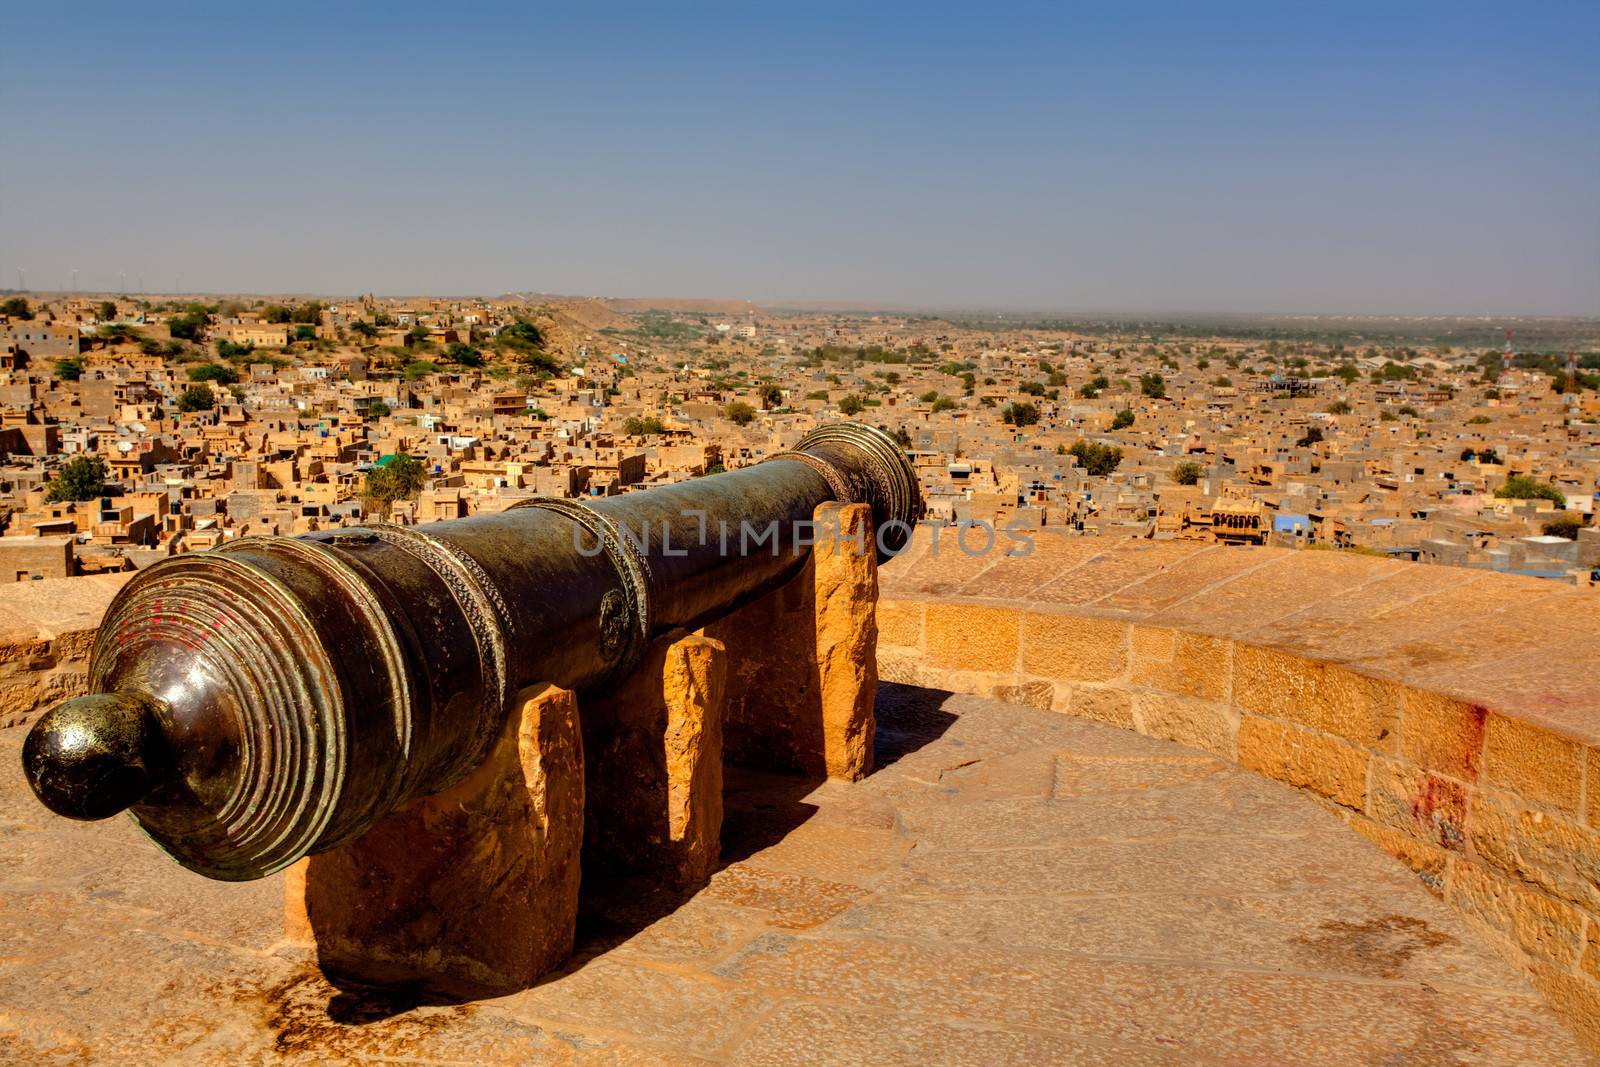 cannon protecting jaisalmer in rajasthan state in india